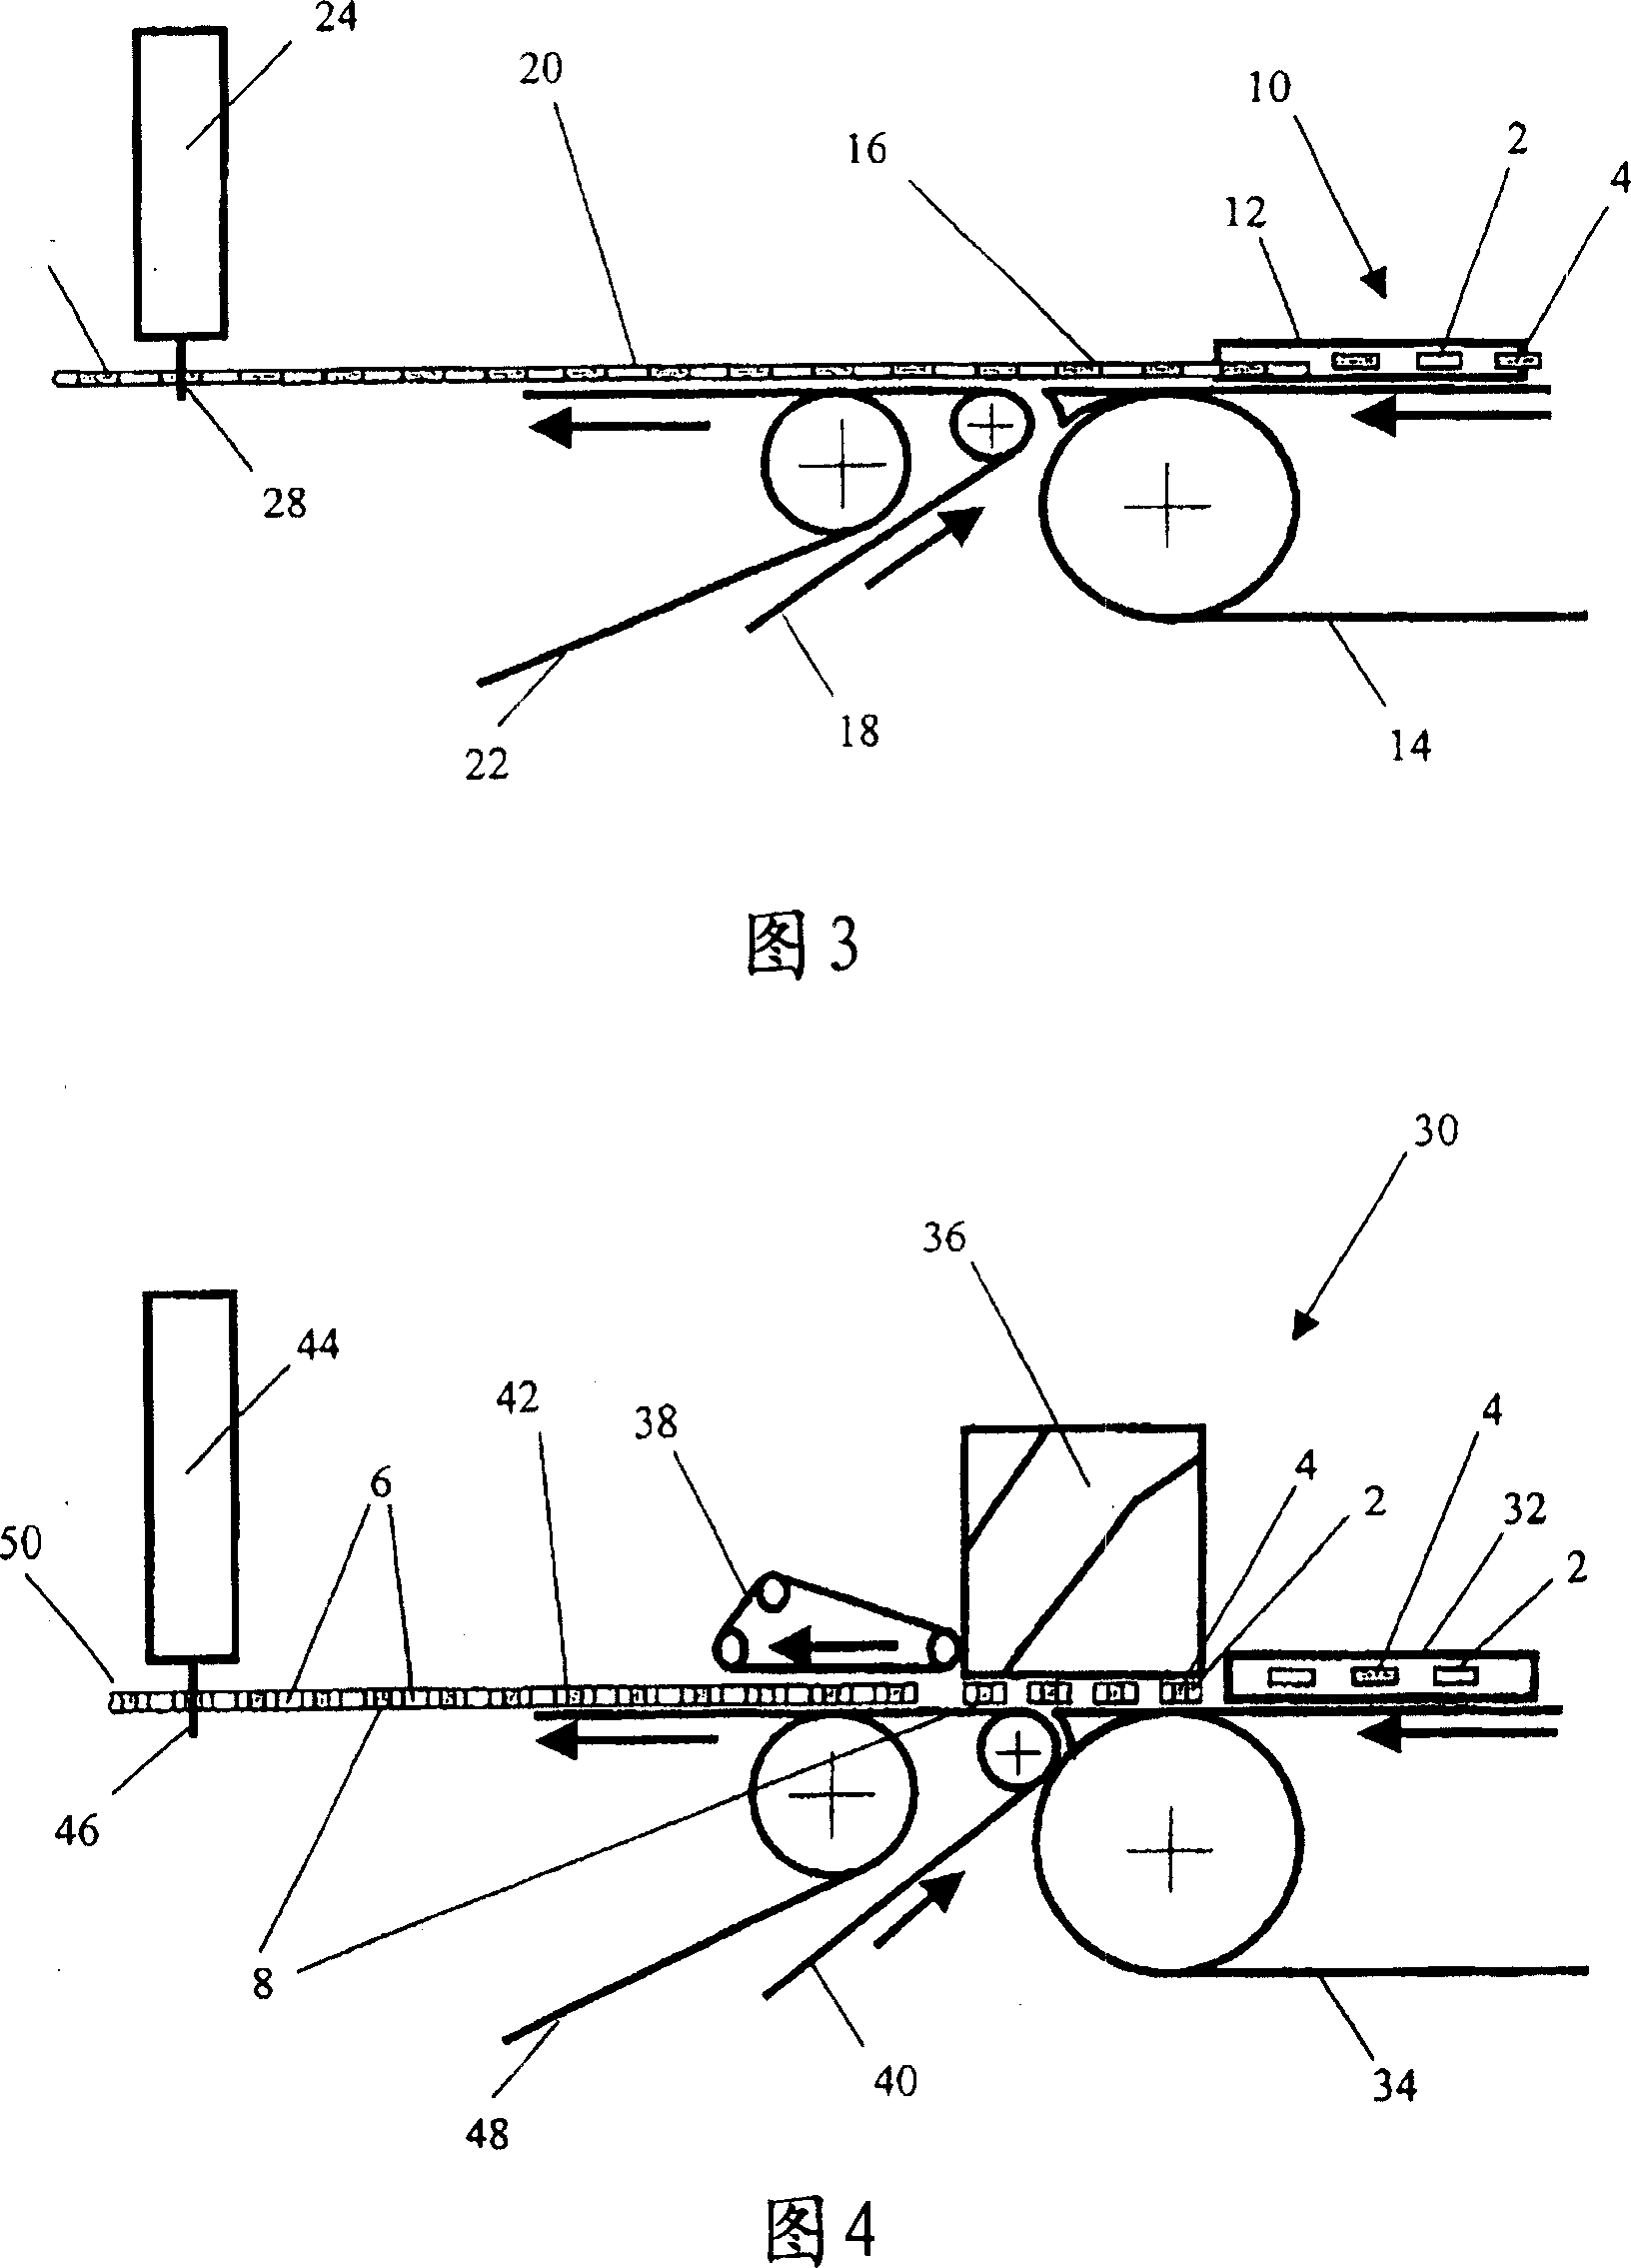 Apparatus and method for the production of composite cigarette filters